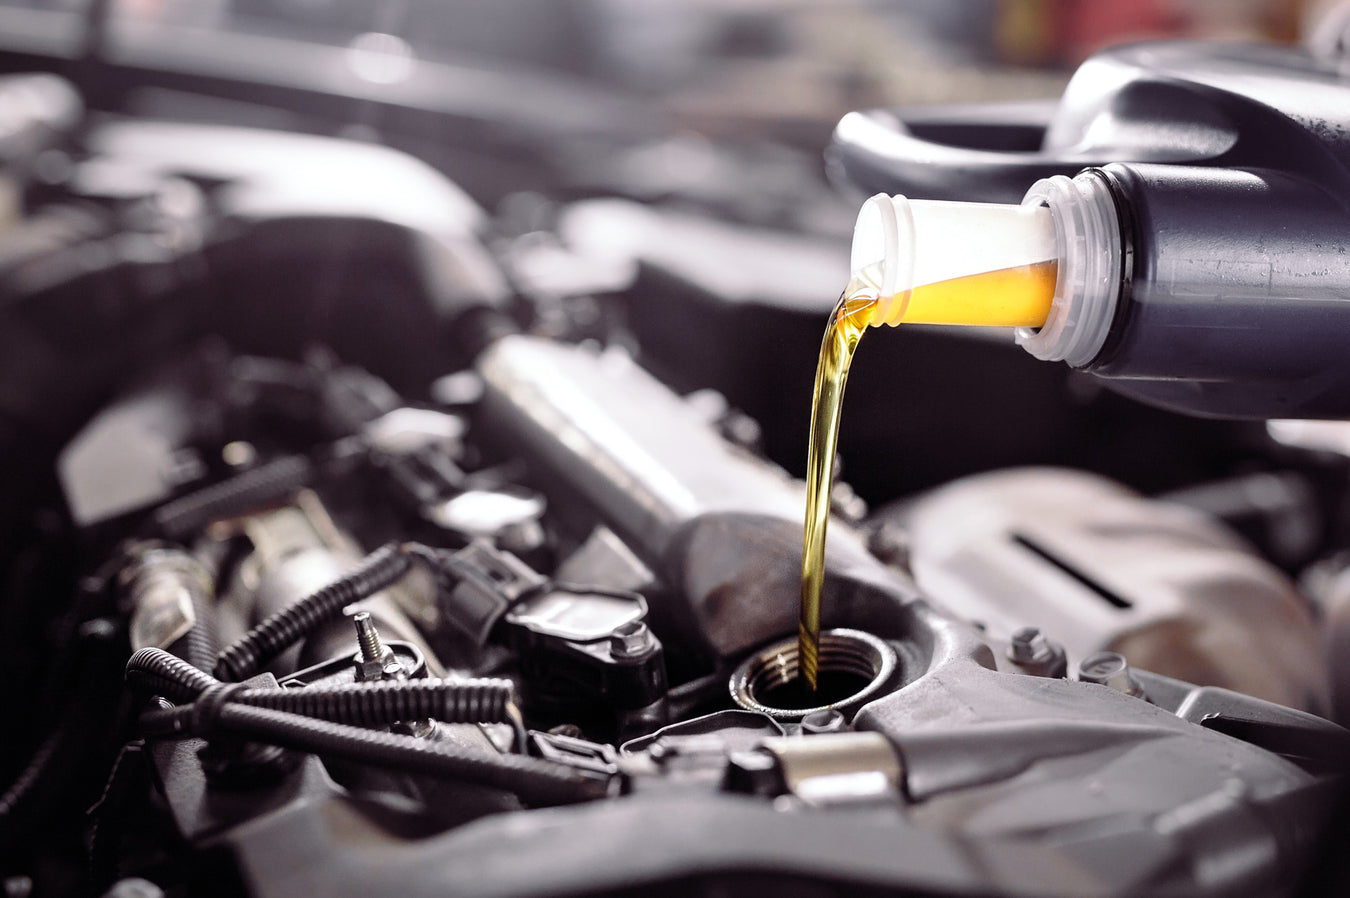 Lubricants, Automotive Art Guyana , car paint , hand tools , power tools , car care , car accessories , Glues and Adhesives , Lubricating Oil